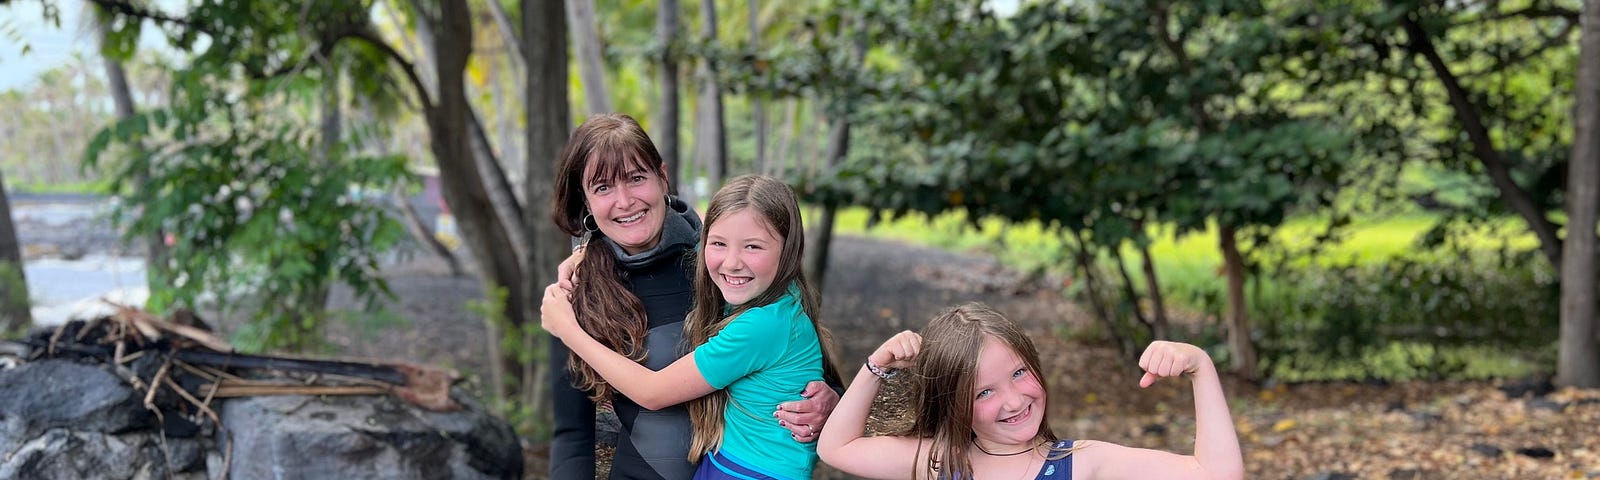 Mom in a wet suit holding a 10 year old girl in shorts and a younger sister showing her muscles. The beach is behind them and they’re being goofy.